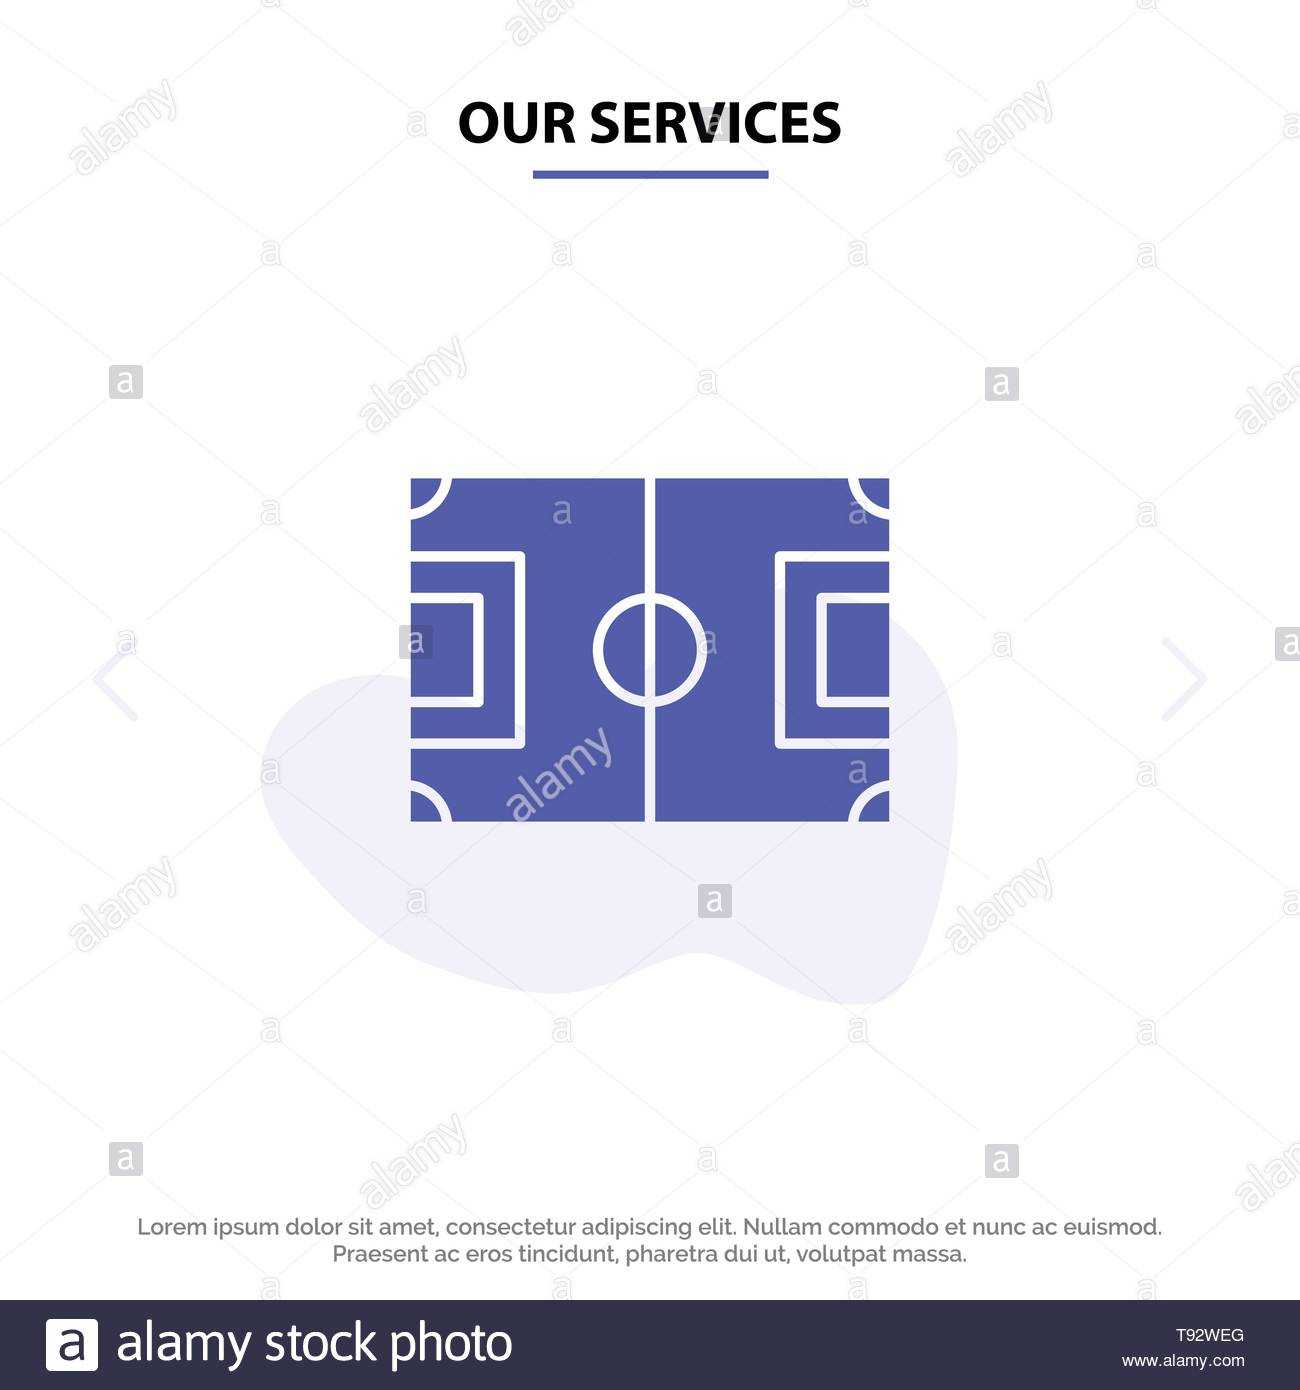 Our Services Field, Football, Game, Pitch, Soccer Solid In Football Referee Game Card Template